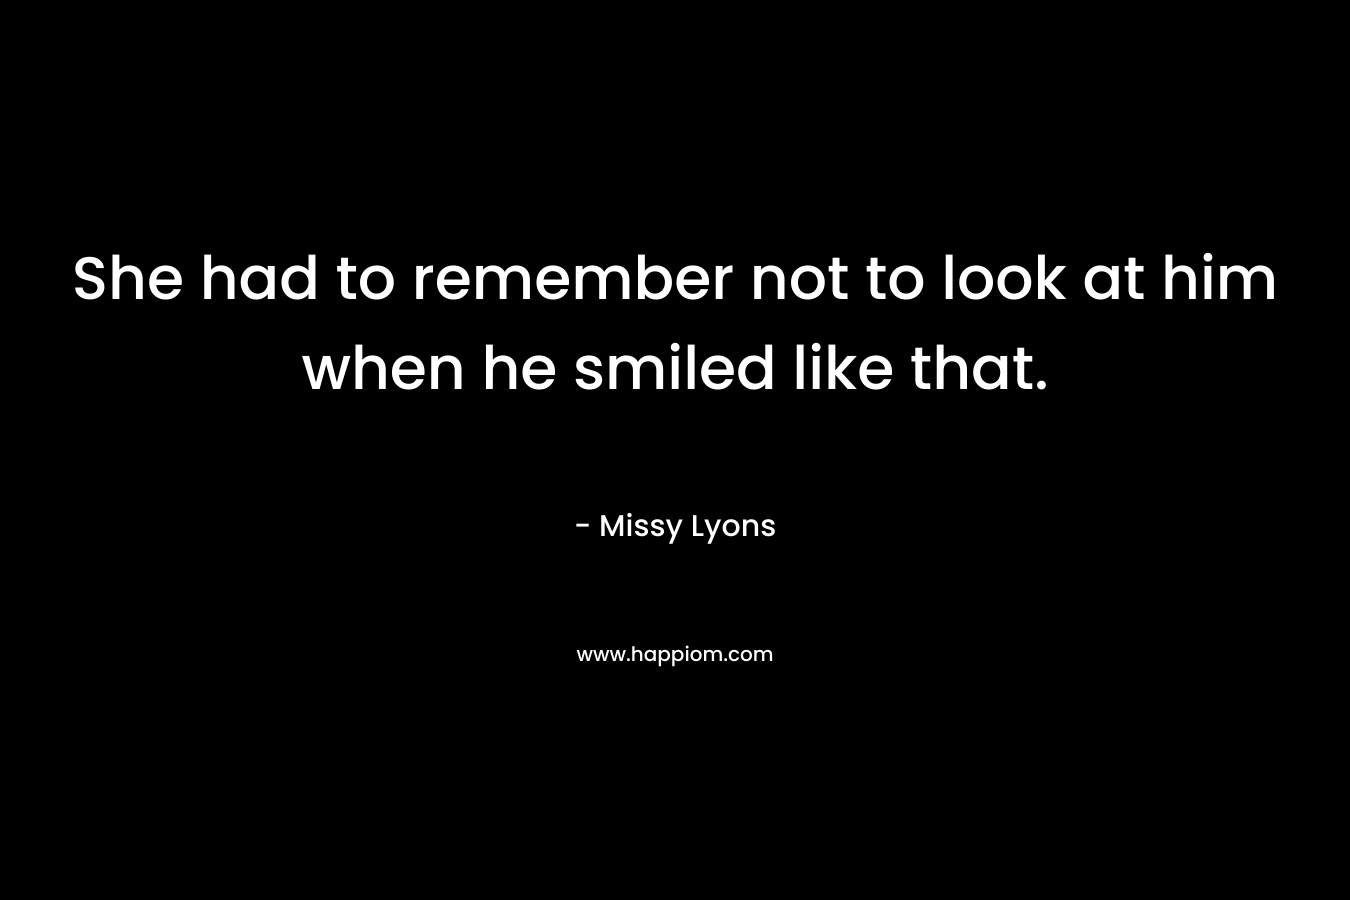 She had to remember not to look at him when he smiled like that. – Missy Lyons